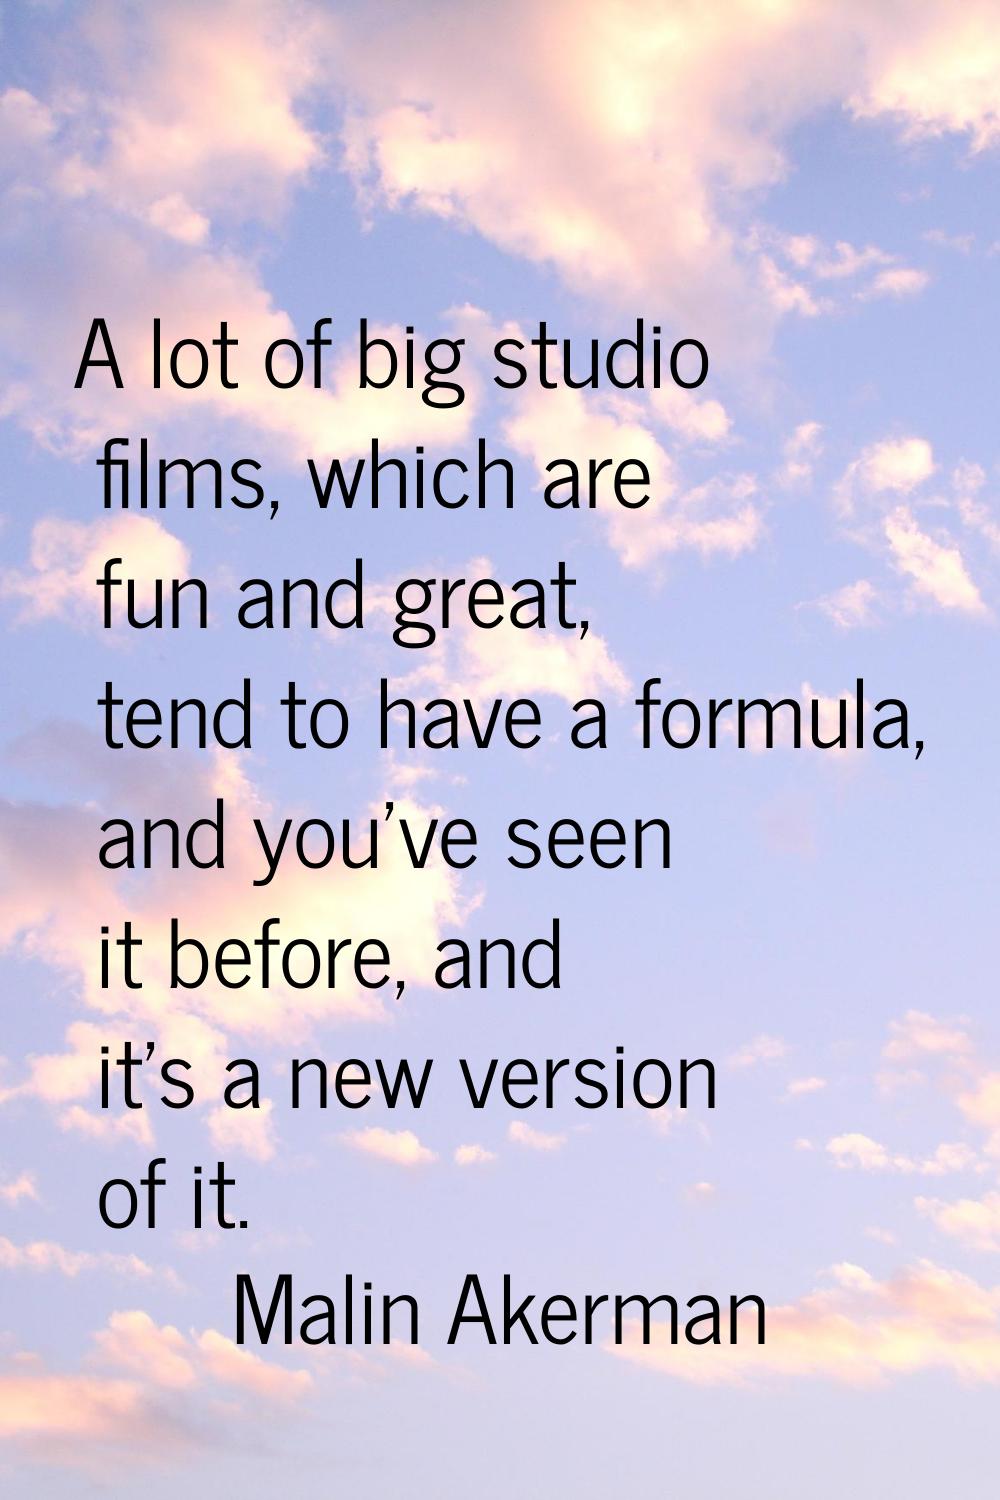 A lot of big studio films, which are fun and great, tend to have a formula, and you've seen it befo